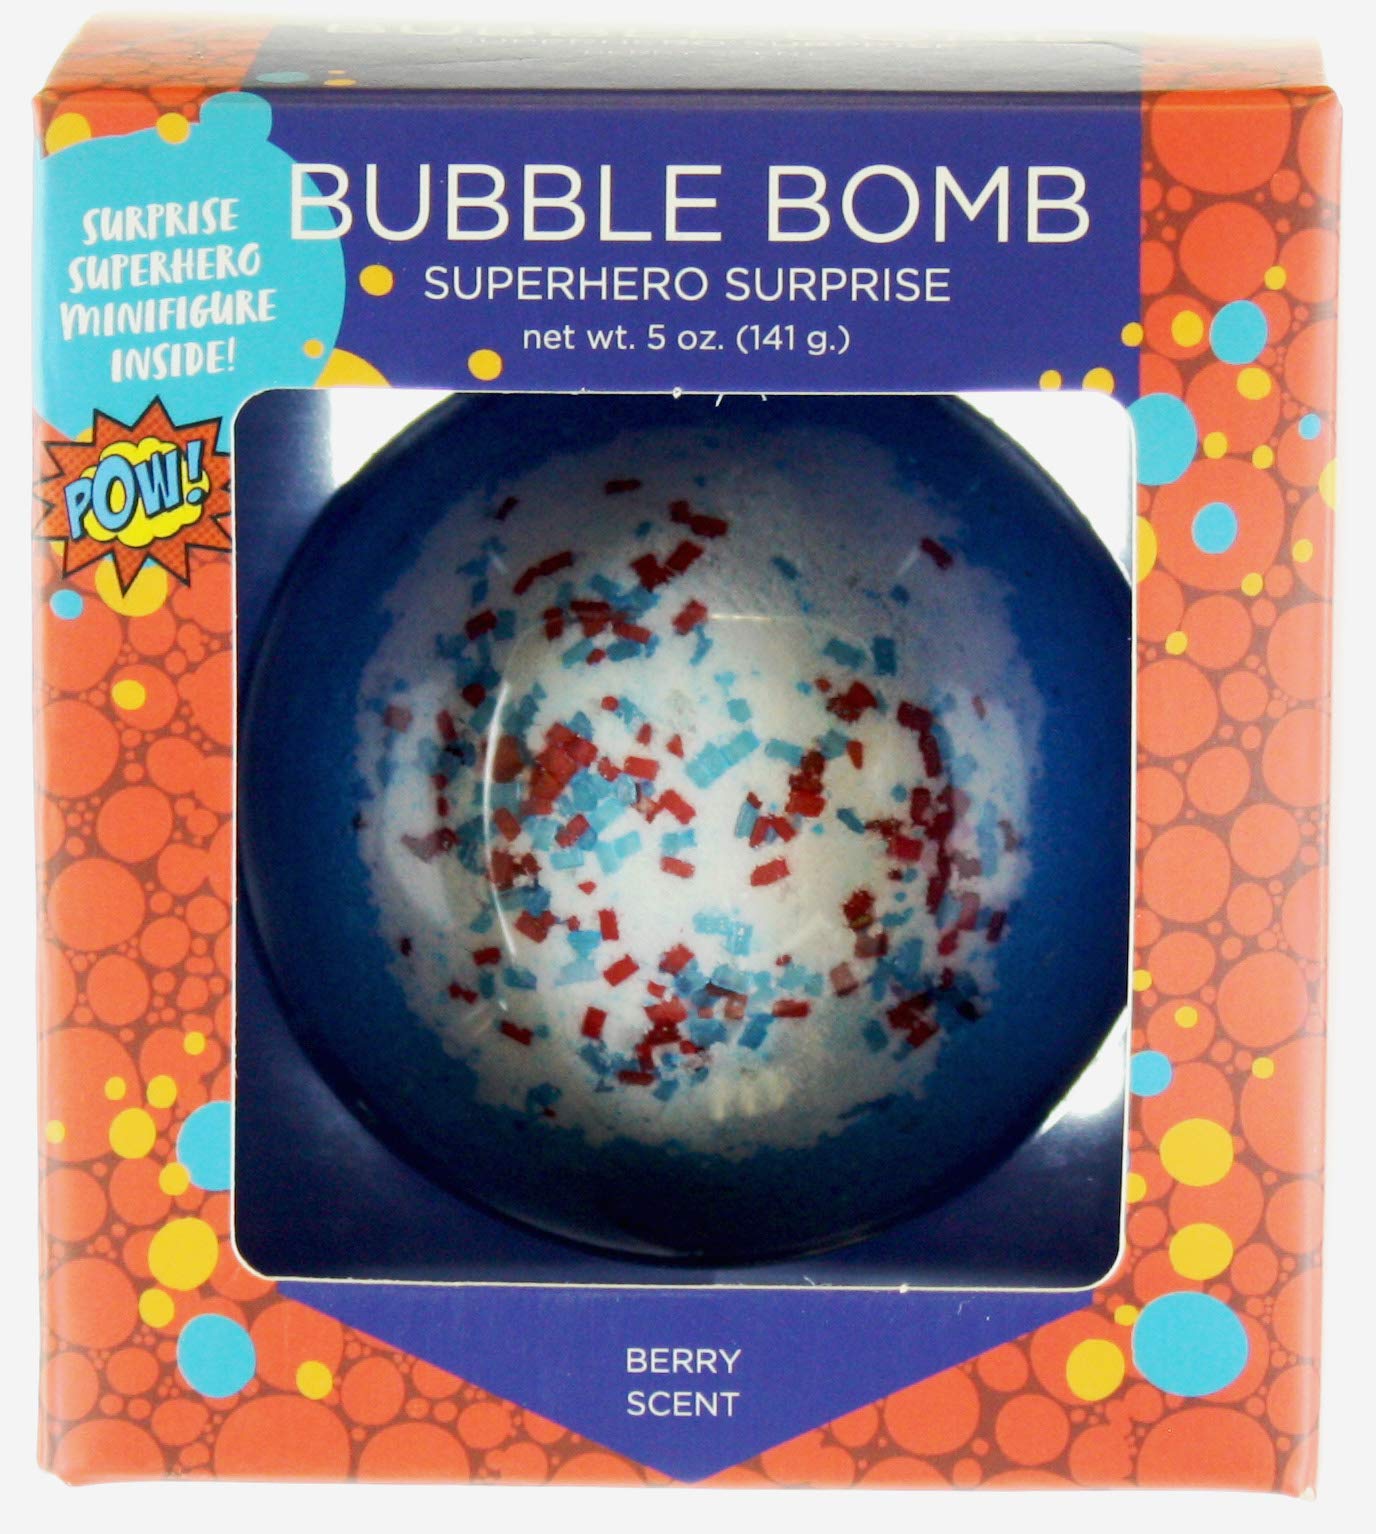 Bath Bombs for Kids with Surprise Superhero Inside - Kids Bath Bombs with Superhero Toys - Fruity Scents, Relaxing Aromas, Safe for Sensitive Skin - Ideal Gift for Girls & Boys by Two Sisters - 1 Pack